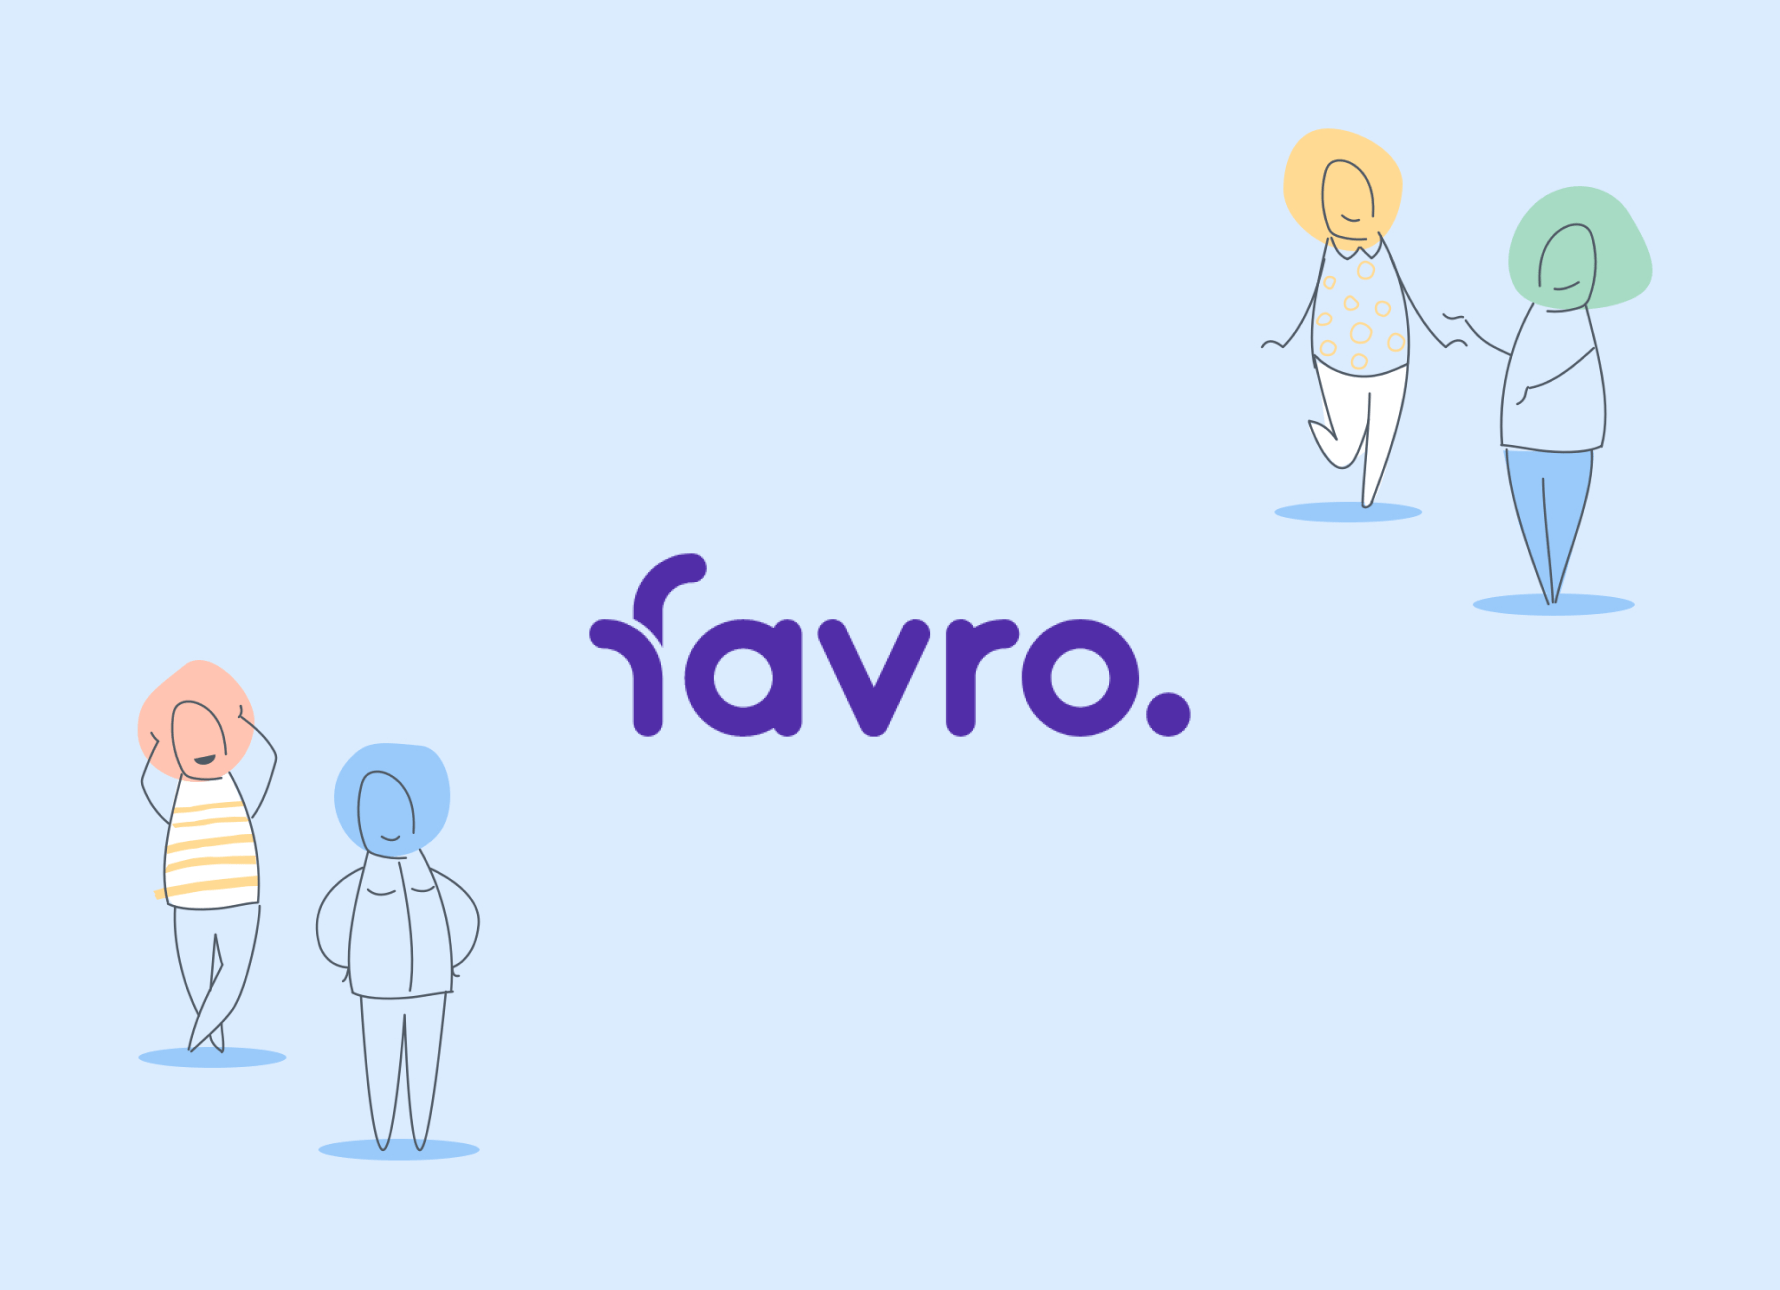 favro logotype with illustrations of people